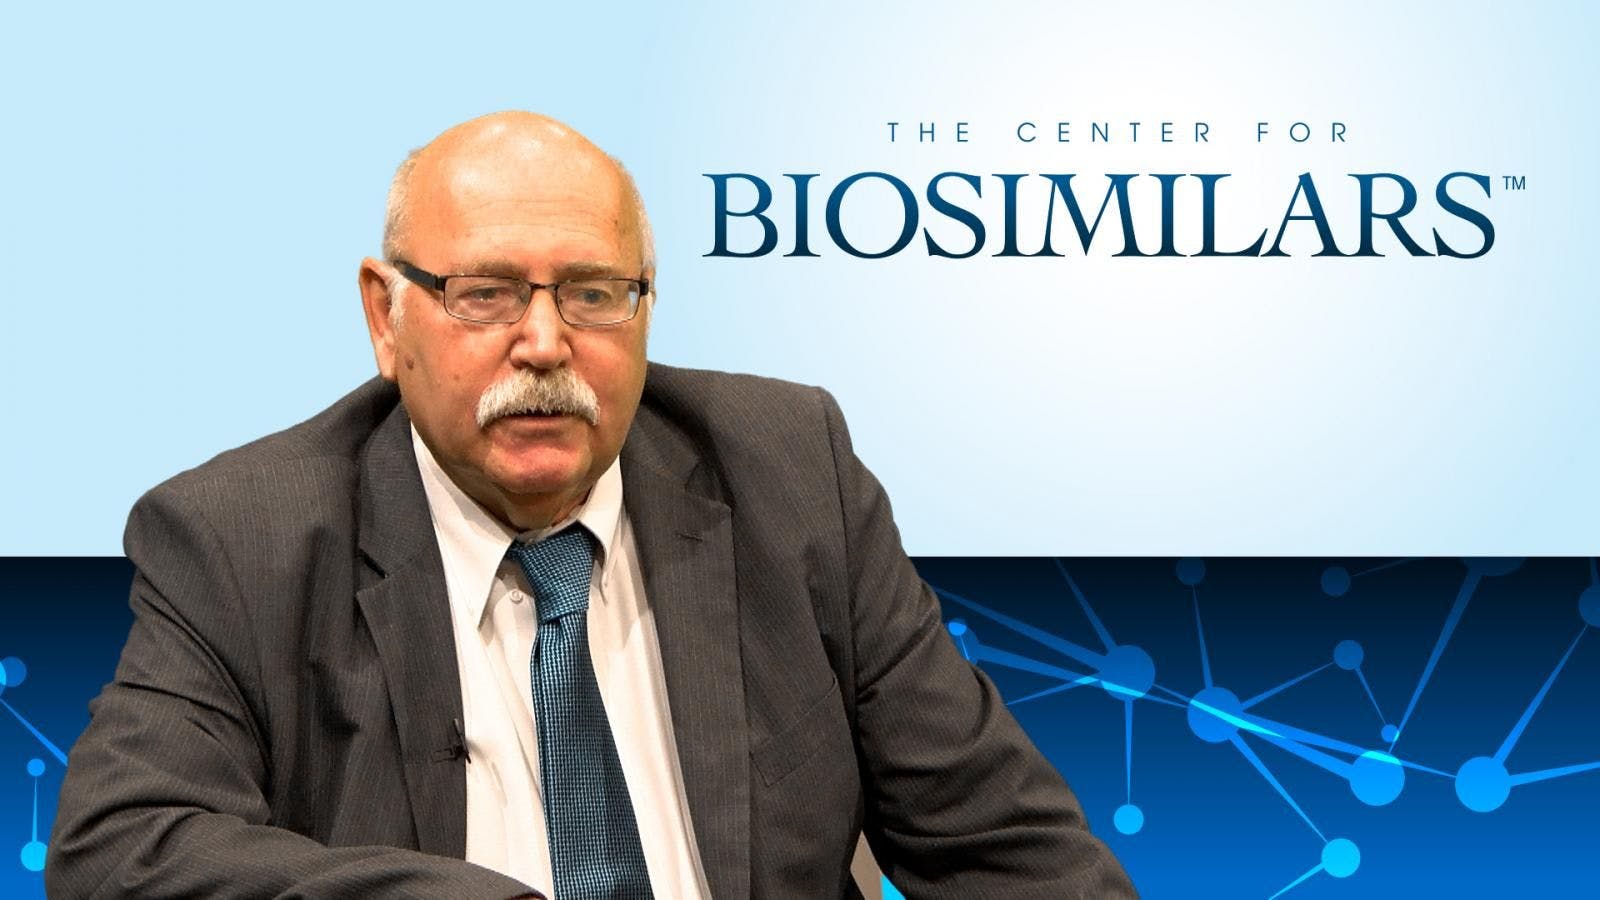 Dr Joseph Fuhr: The Immediate Economic Impact of Biosimilars May be Limited